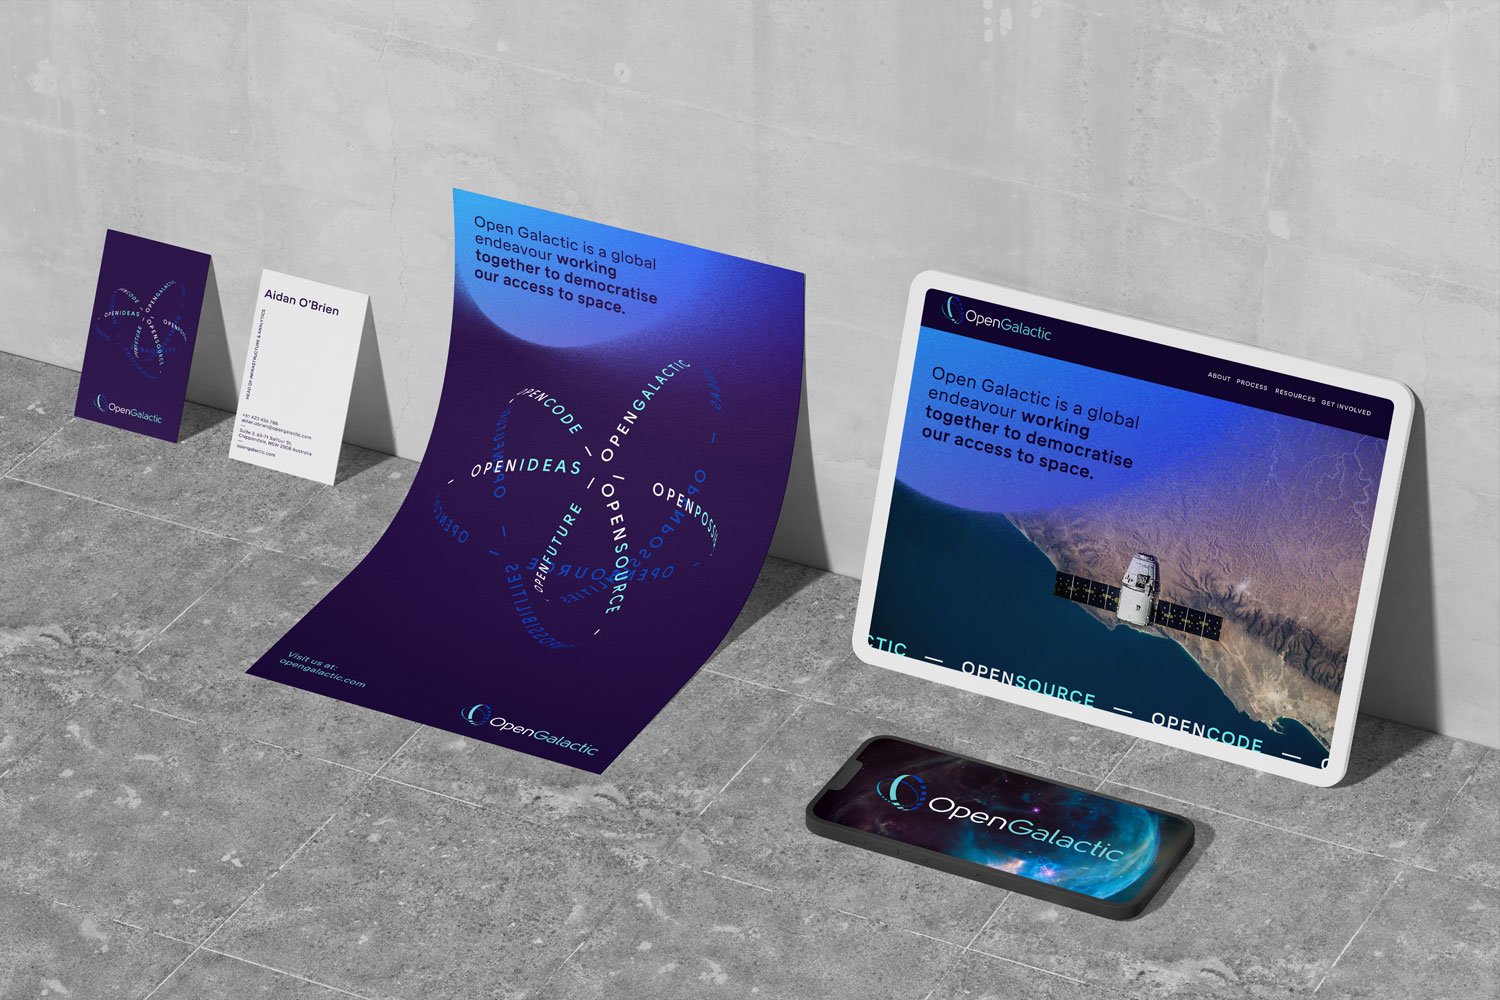 Branded elements overview, with ipad and poster for Open Galactic